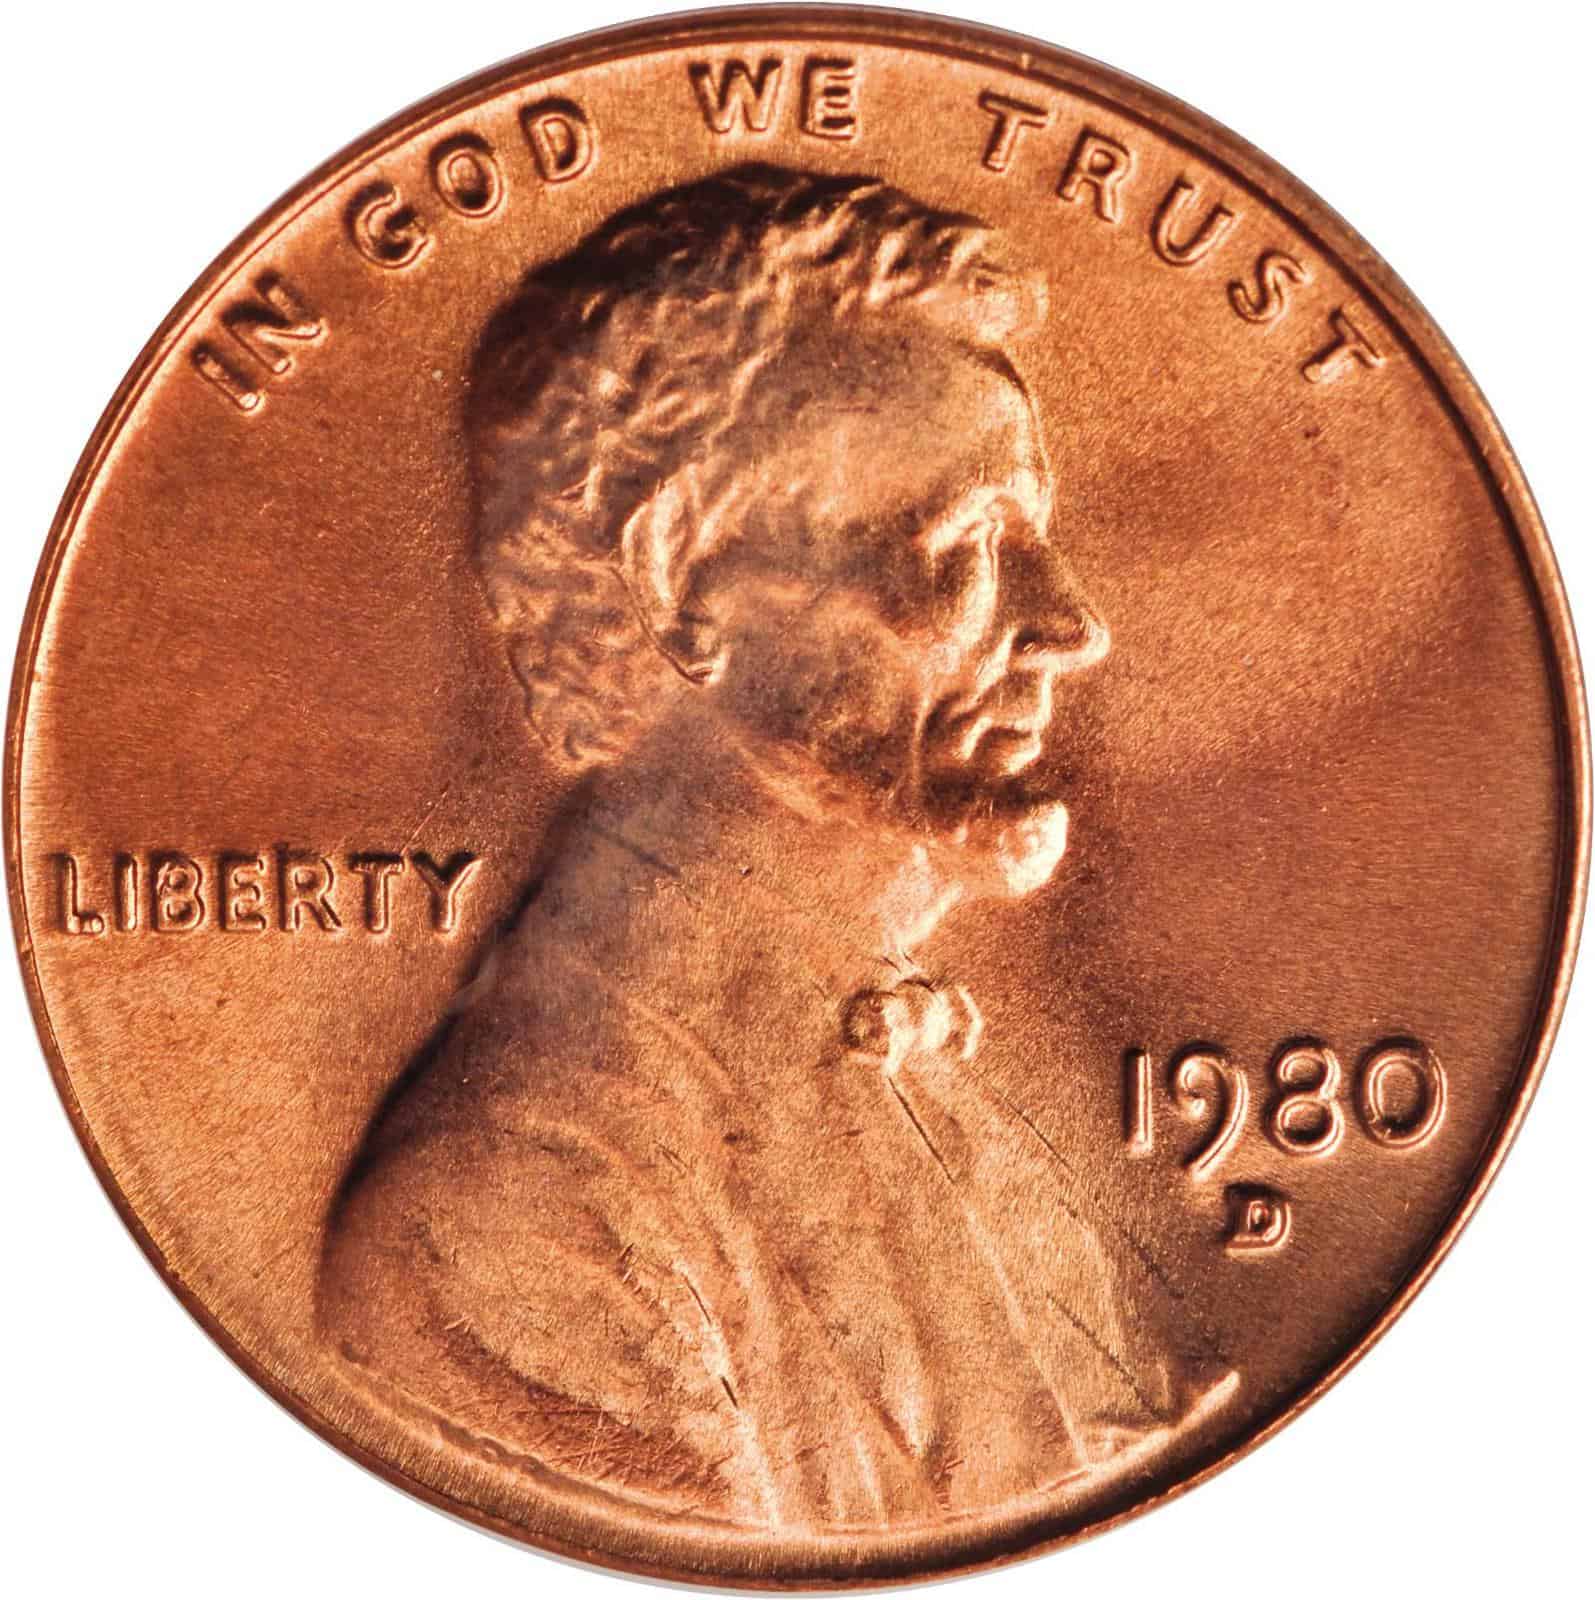 The Obverse of the 1980 Penny